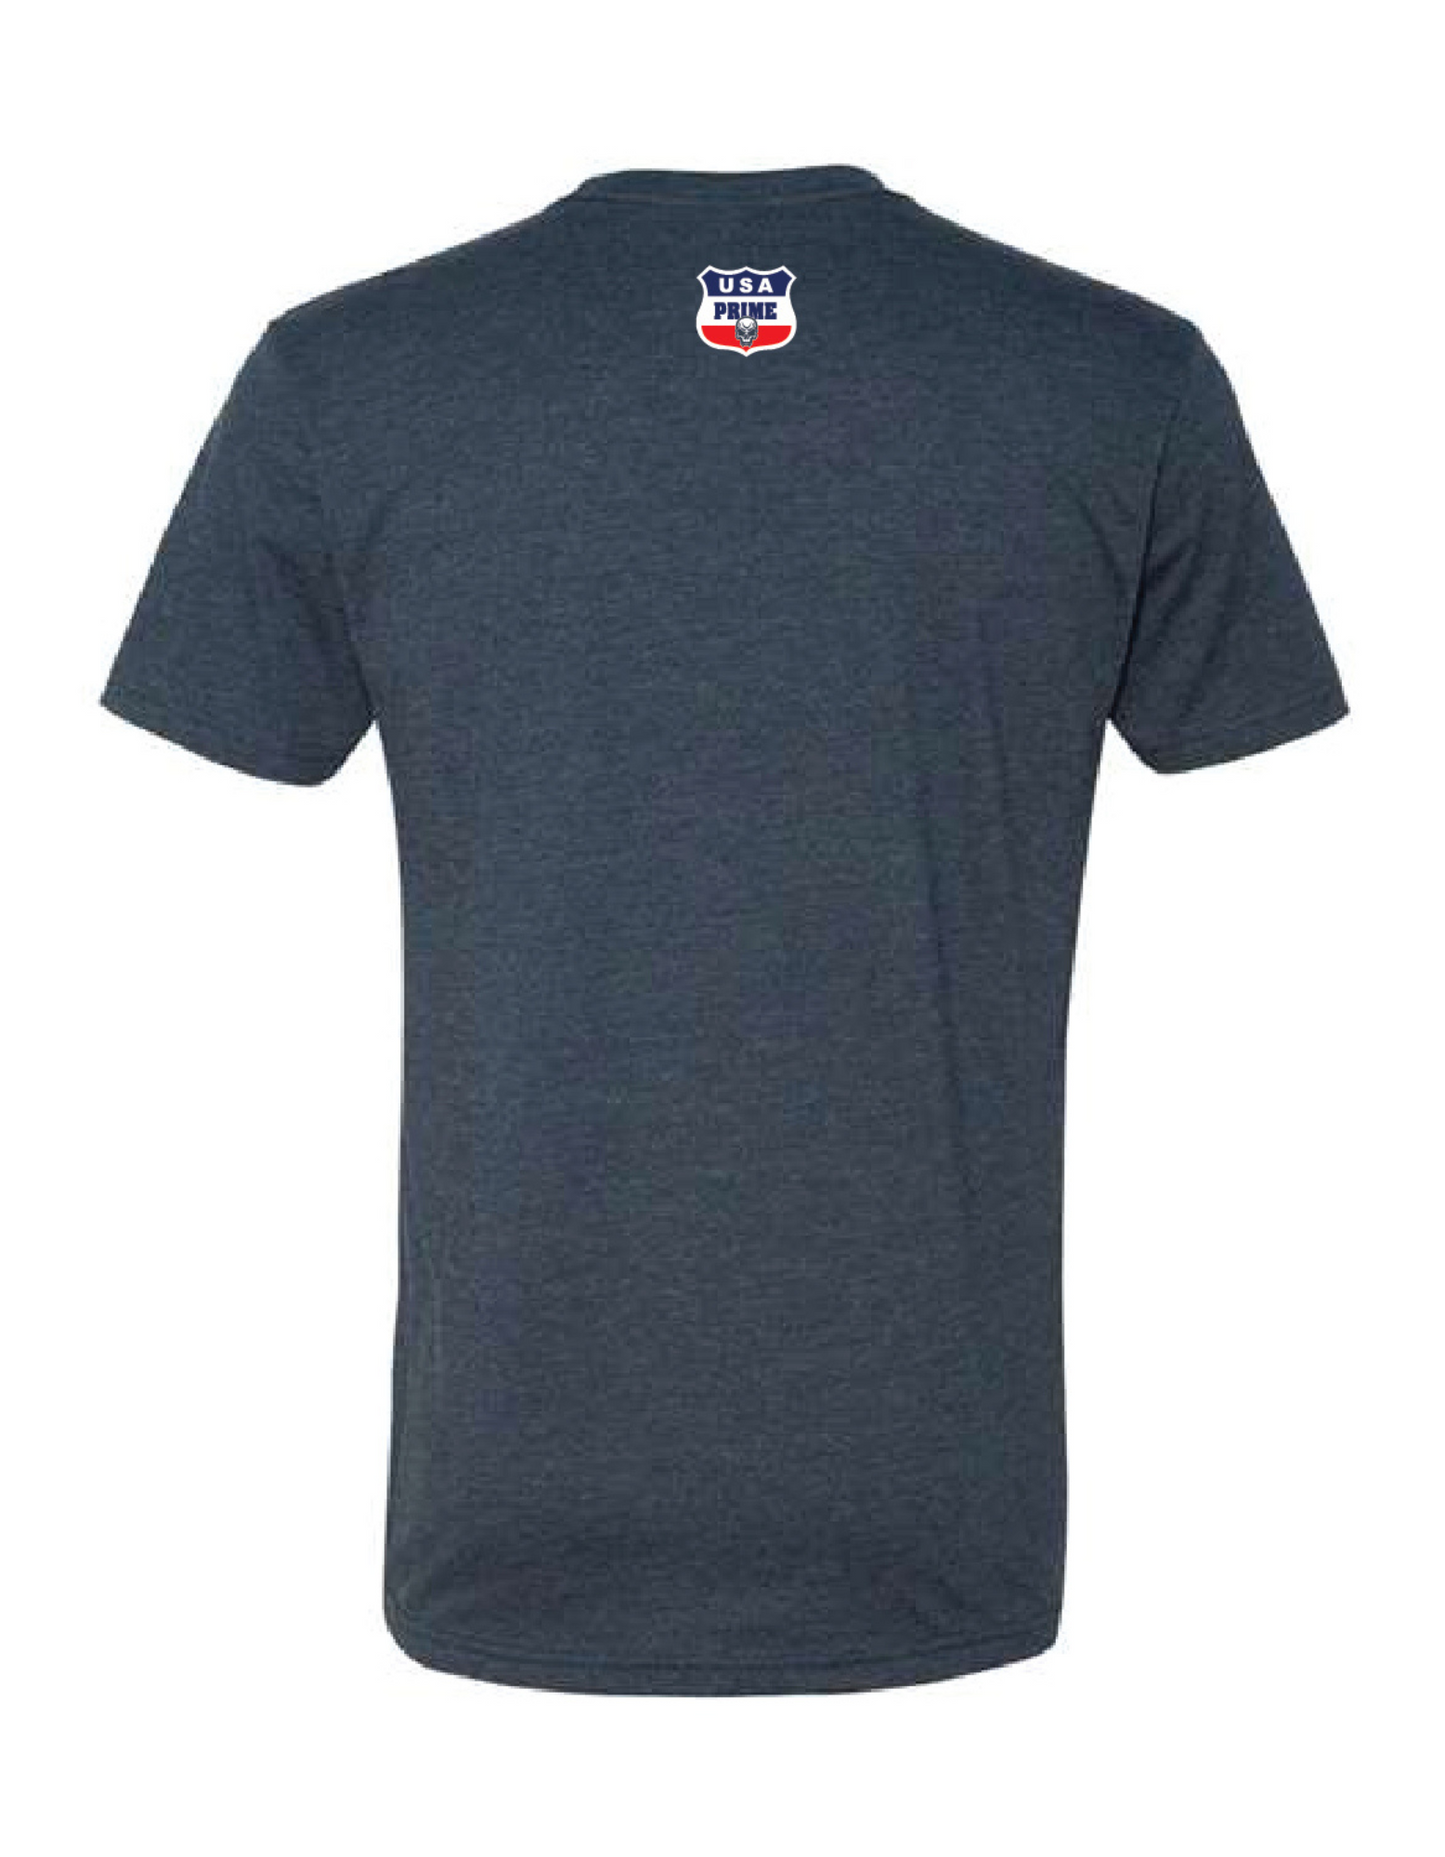 Built In America Graphic T-Shirt